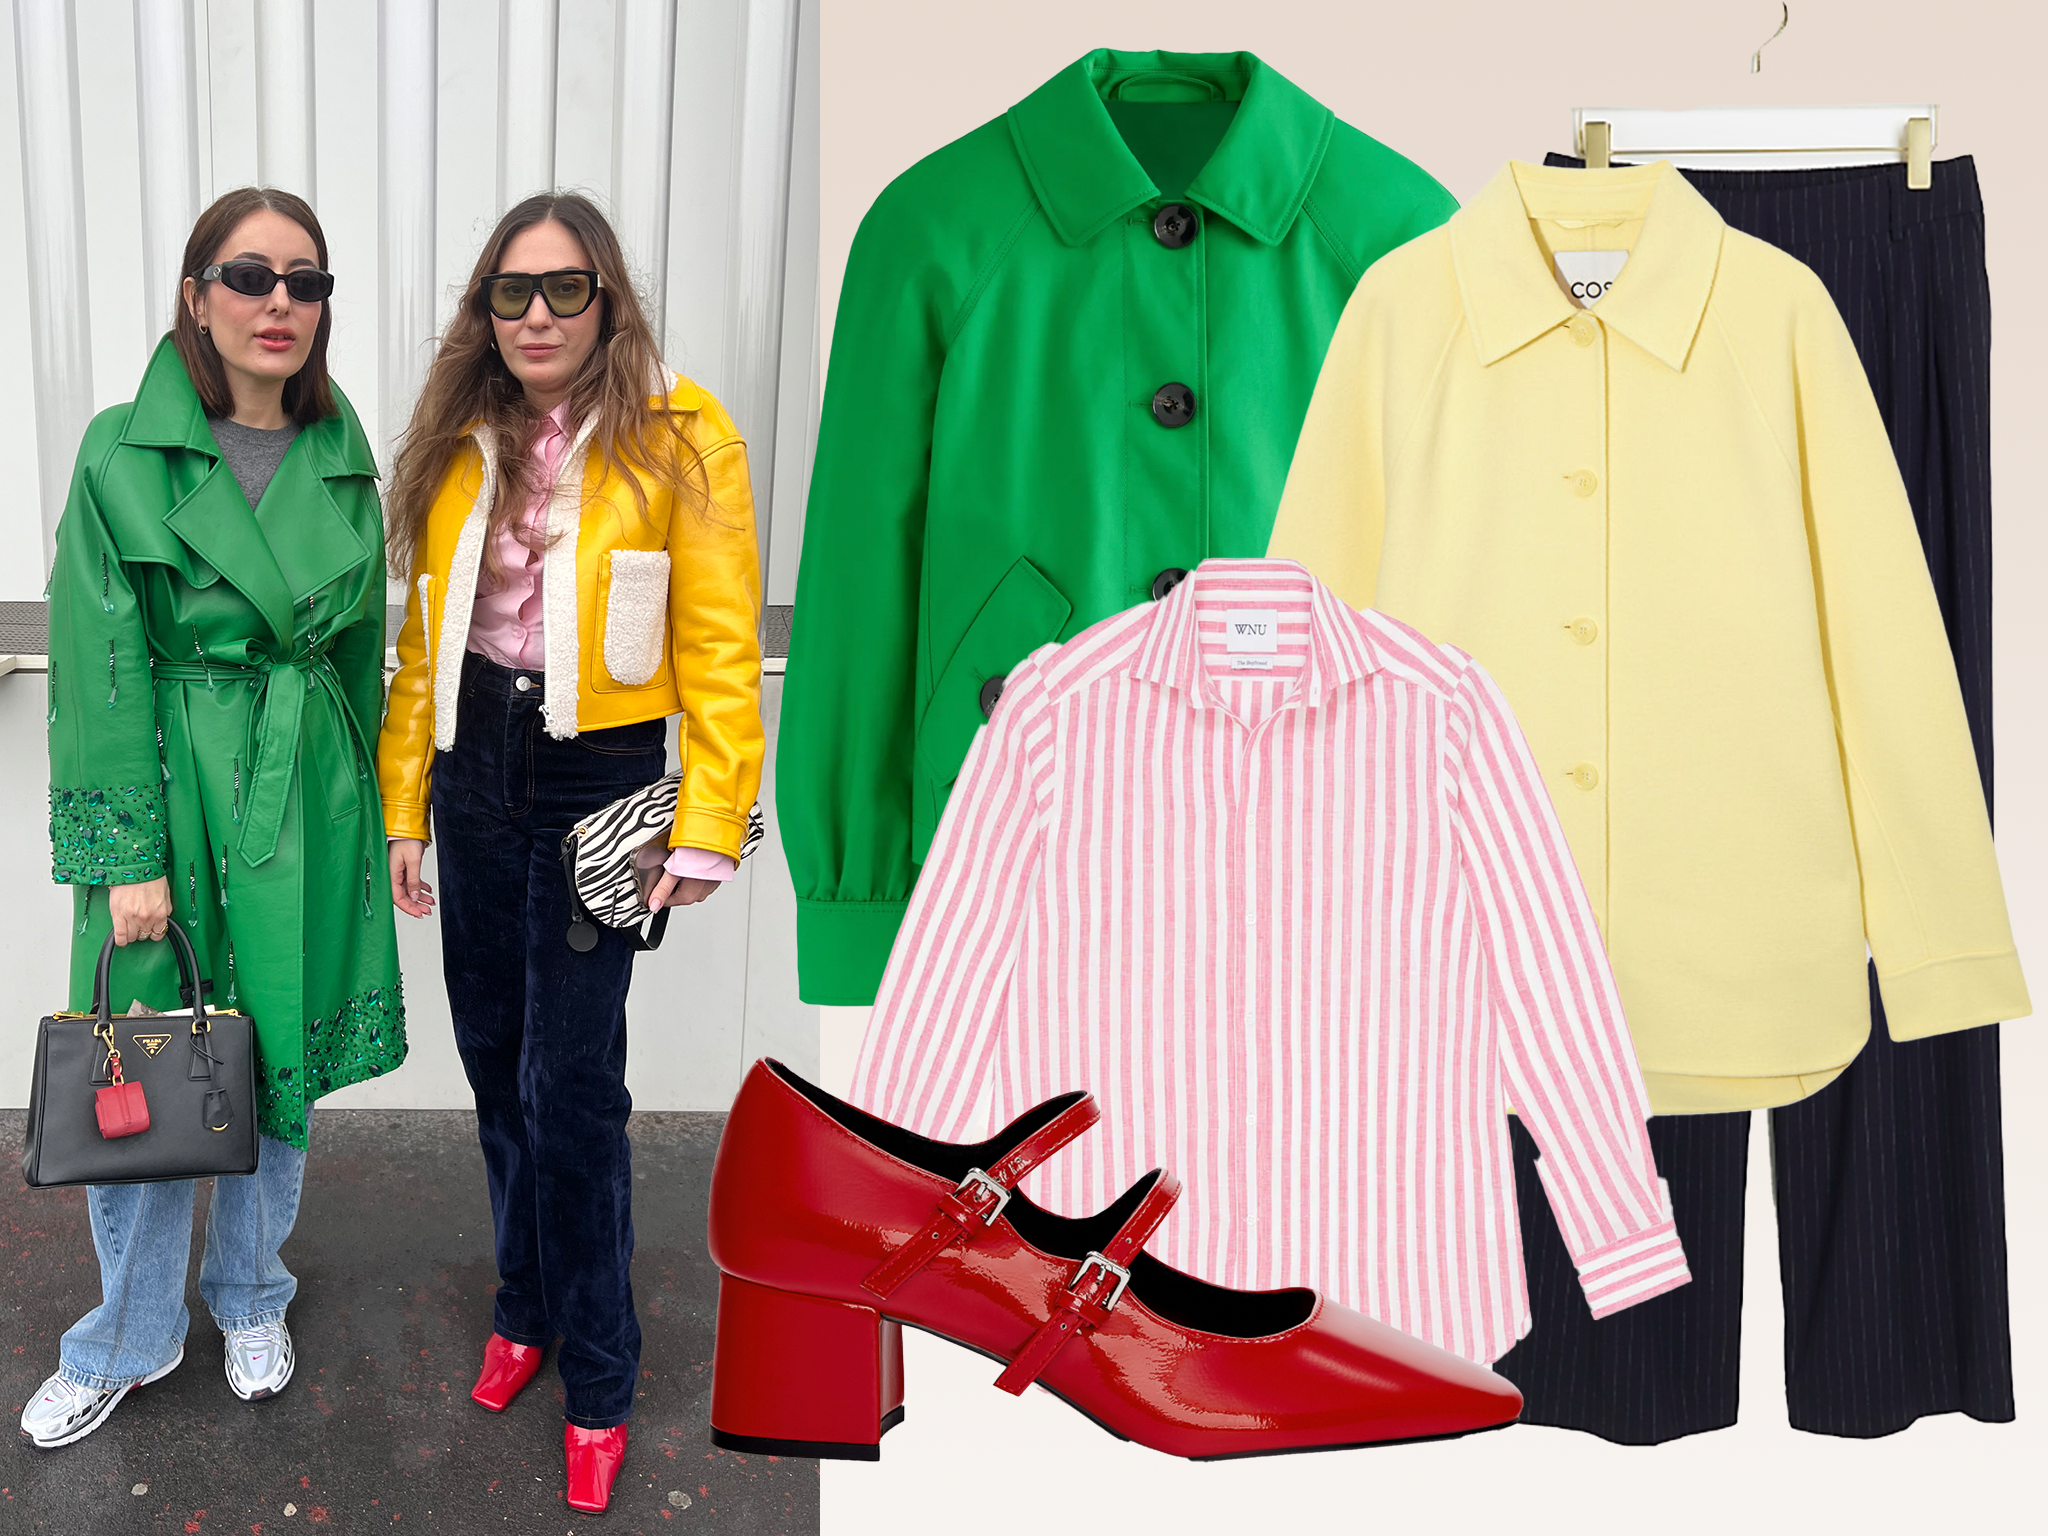 Asil Asli and Duygu Bengi give us a styling lesson in bright and bold shades